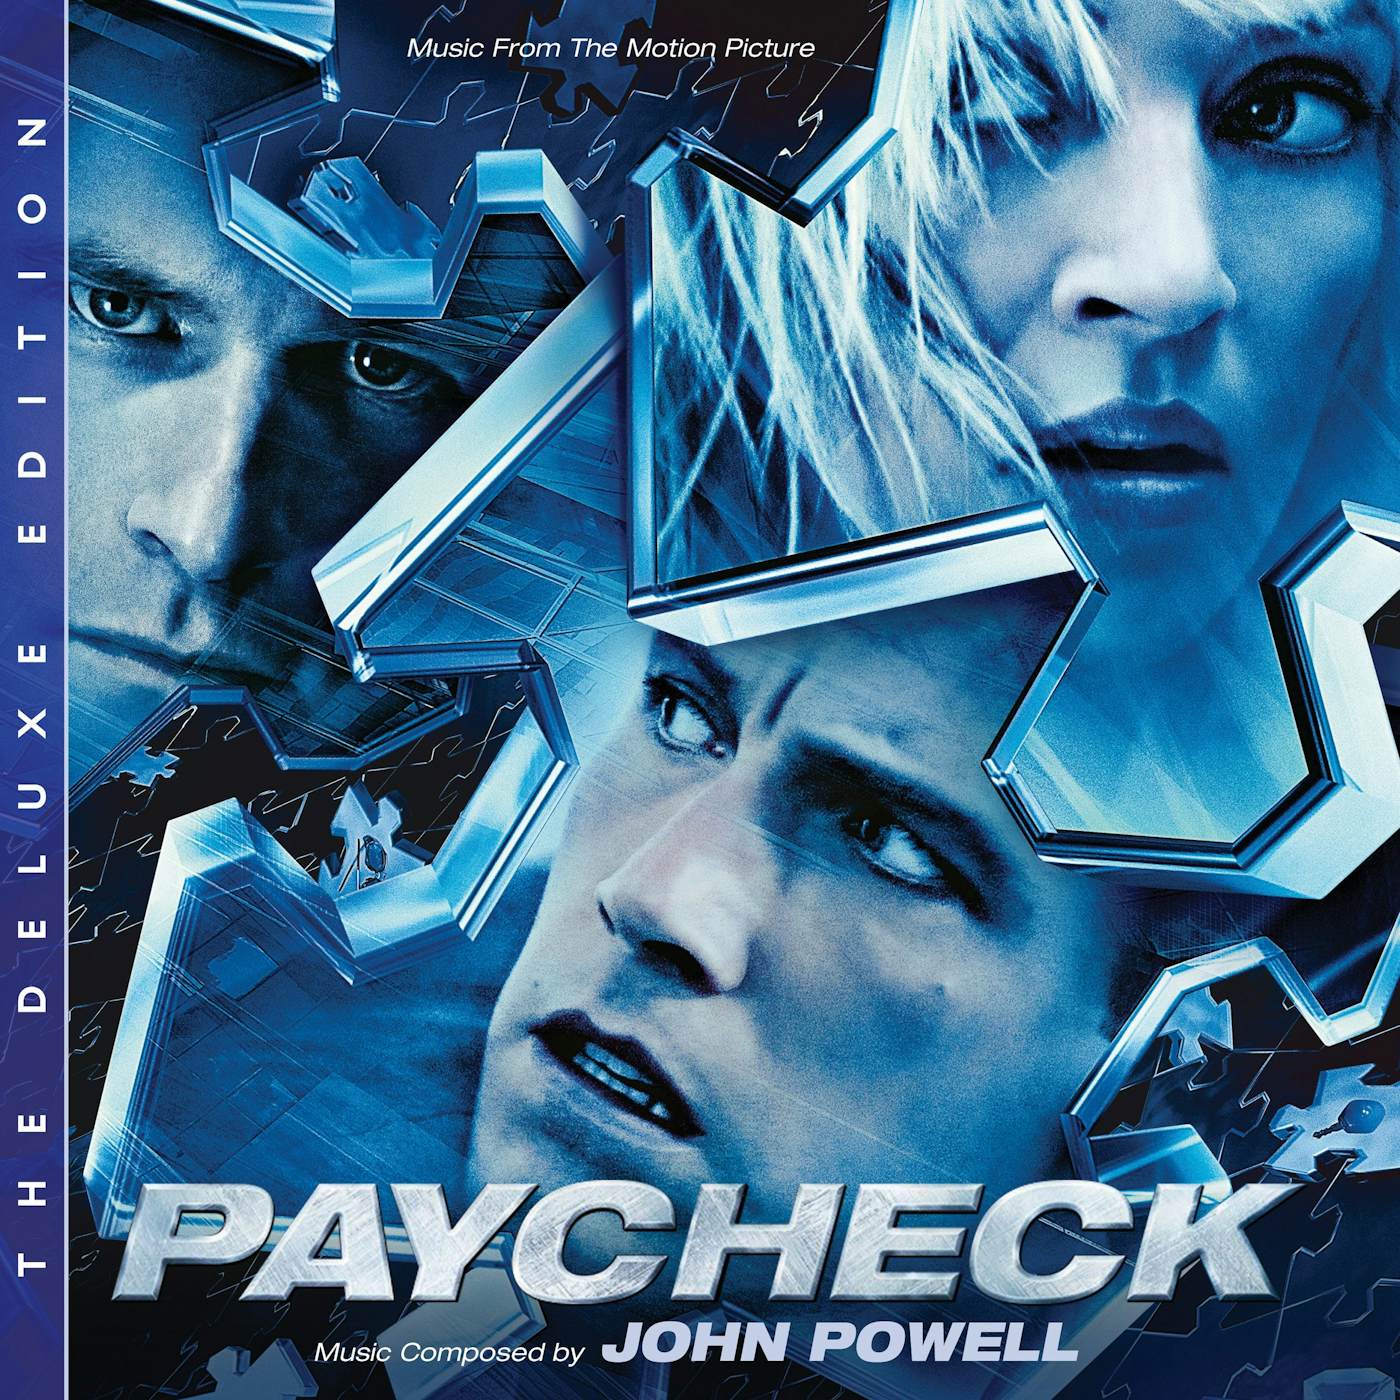 John Powell Paycheck: The Deluxe Edition (Music From The Motion Picture) (2-CD)